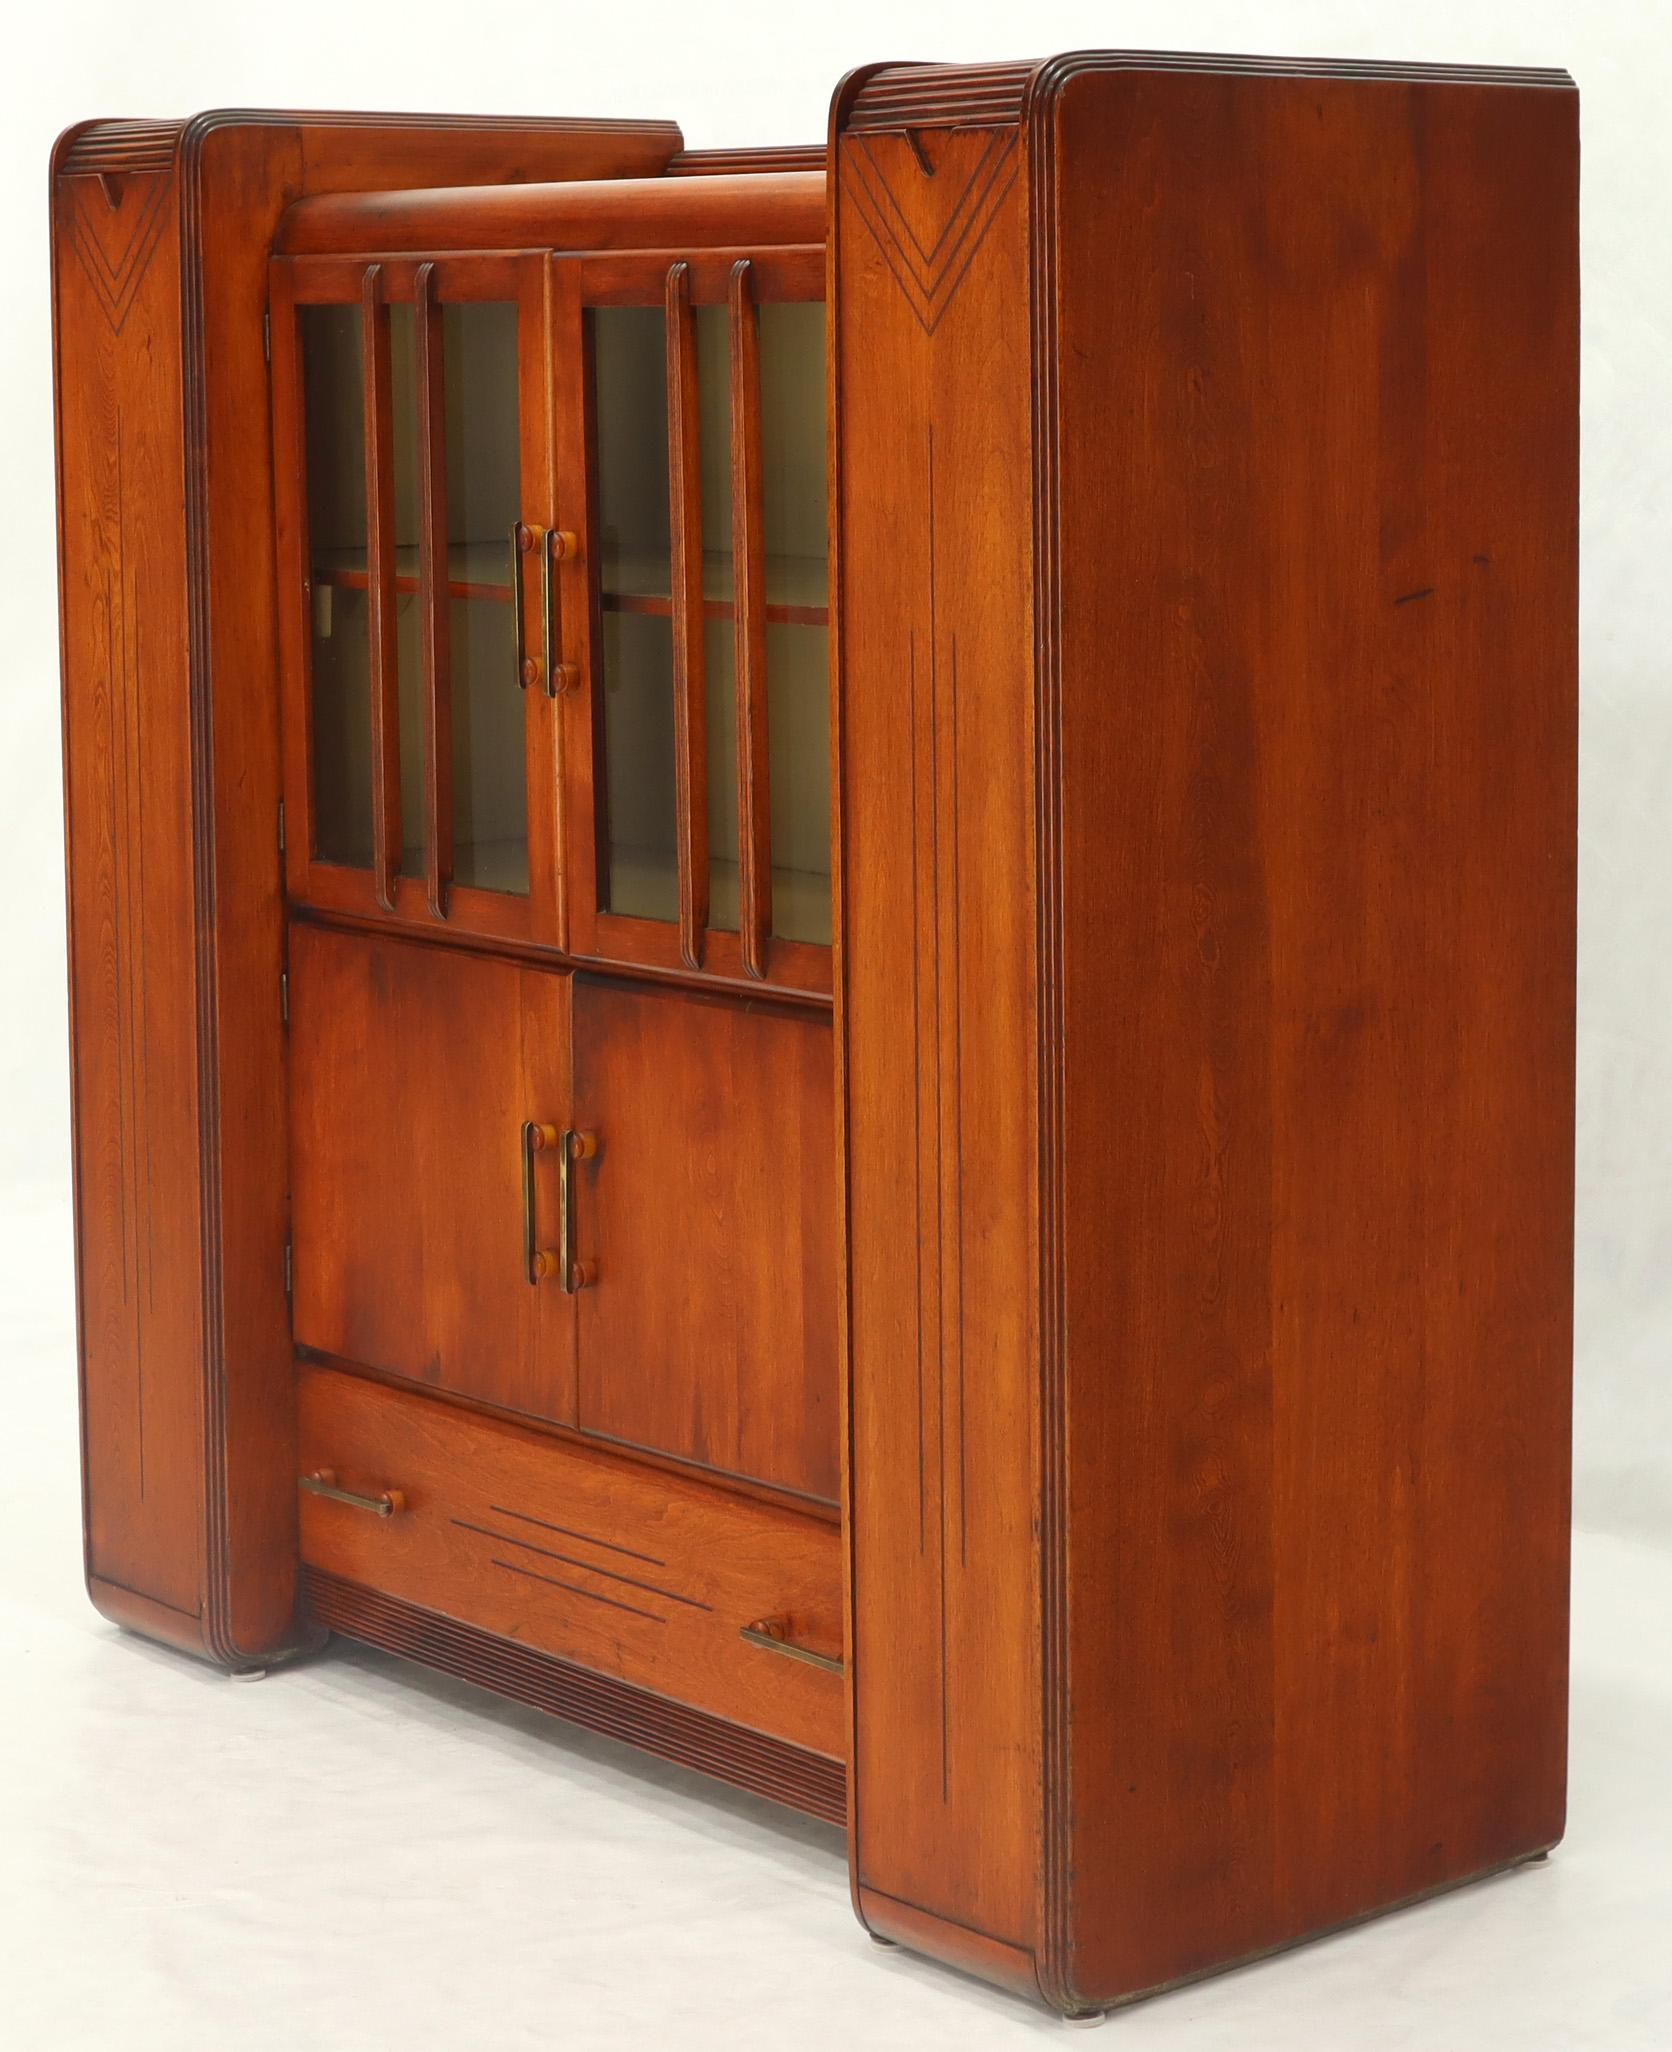 Very unusual multi purpose Art Deco storage cabinet with lid top compartments, back splash, double glass doors, and bakelite and brass hardware. One drawer storage compartment on the bottom. Gilbert Rohde era.
 